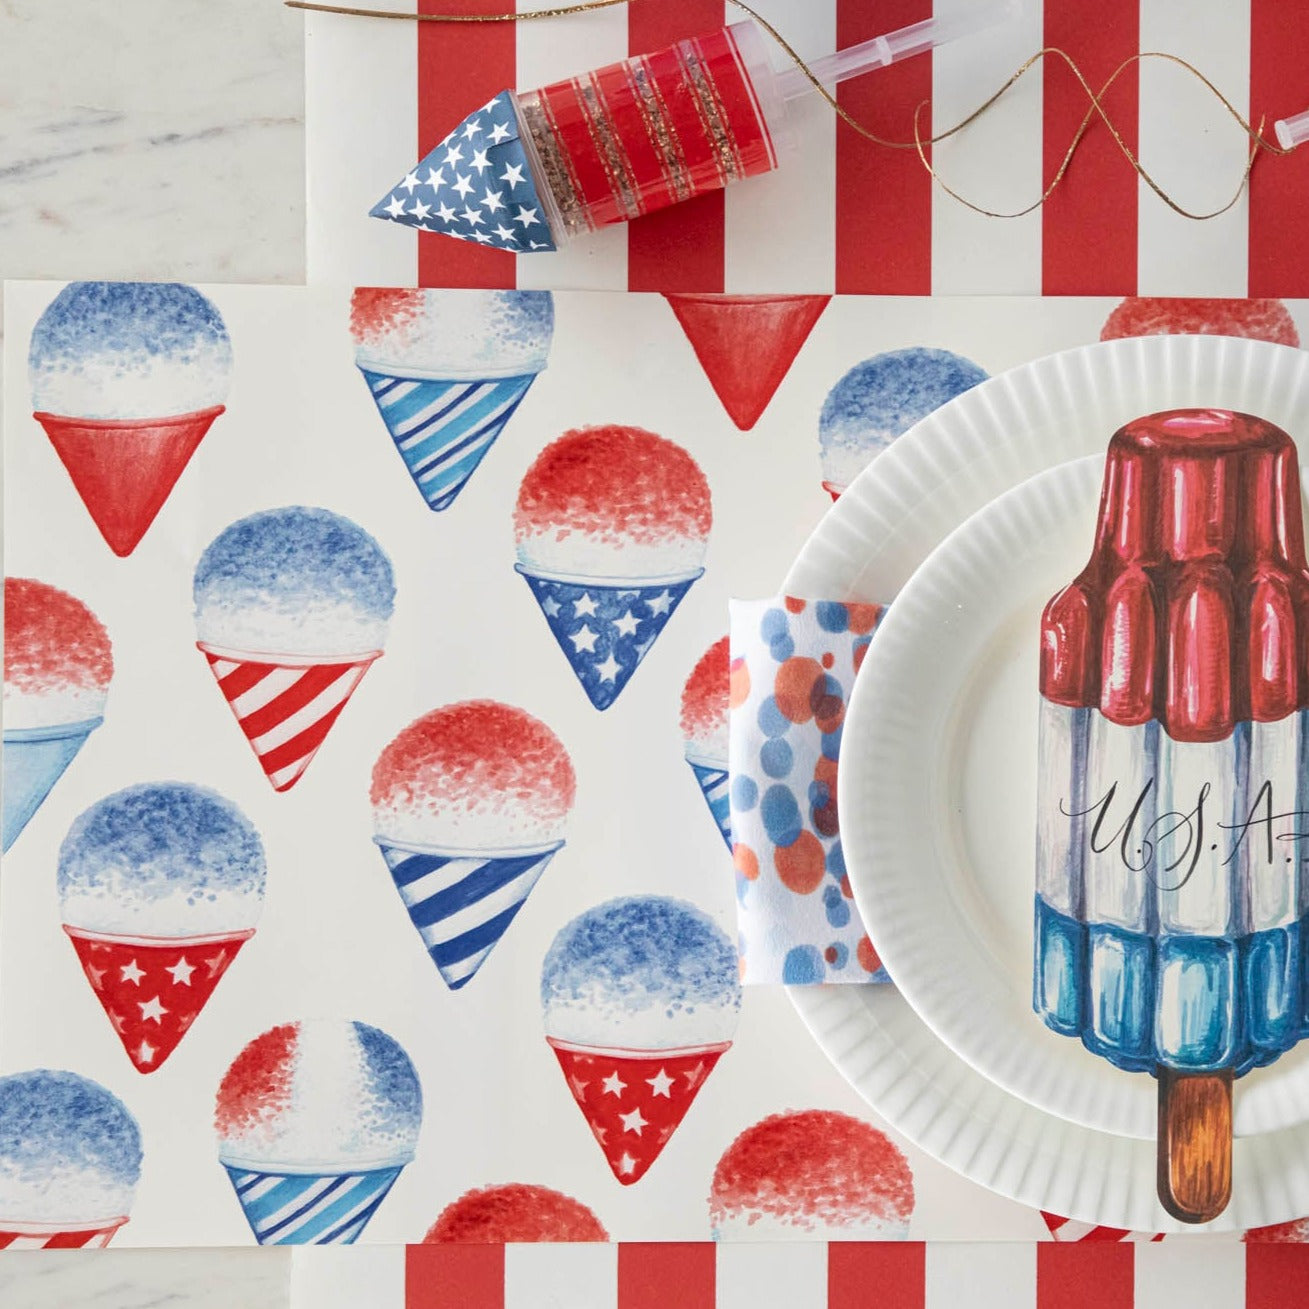 Celebrate the summer season and show your love for the USA with these festive Snow Cone placemats from Hester &amp; Cook. Perfect for adding a patriotic touch to your holiday table setting, these placemats will surely impress.